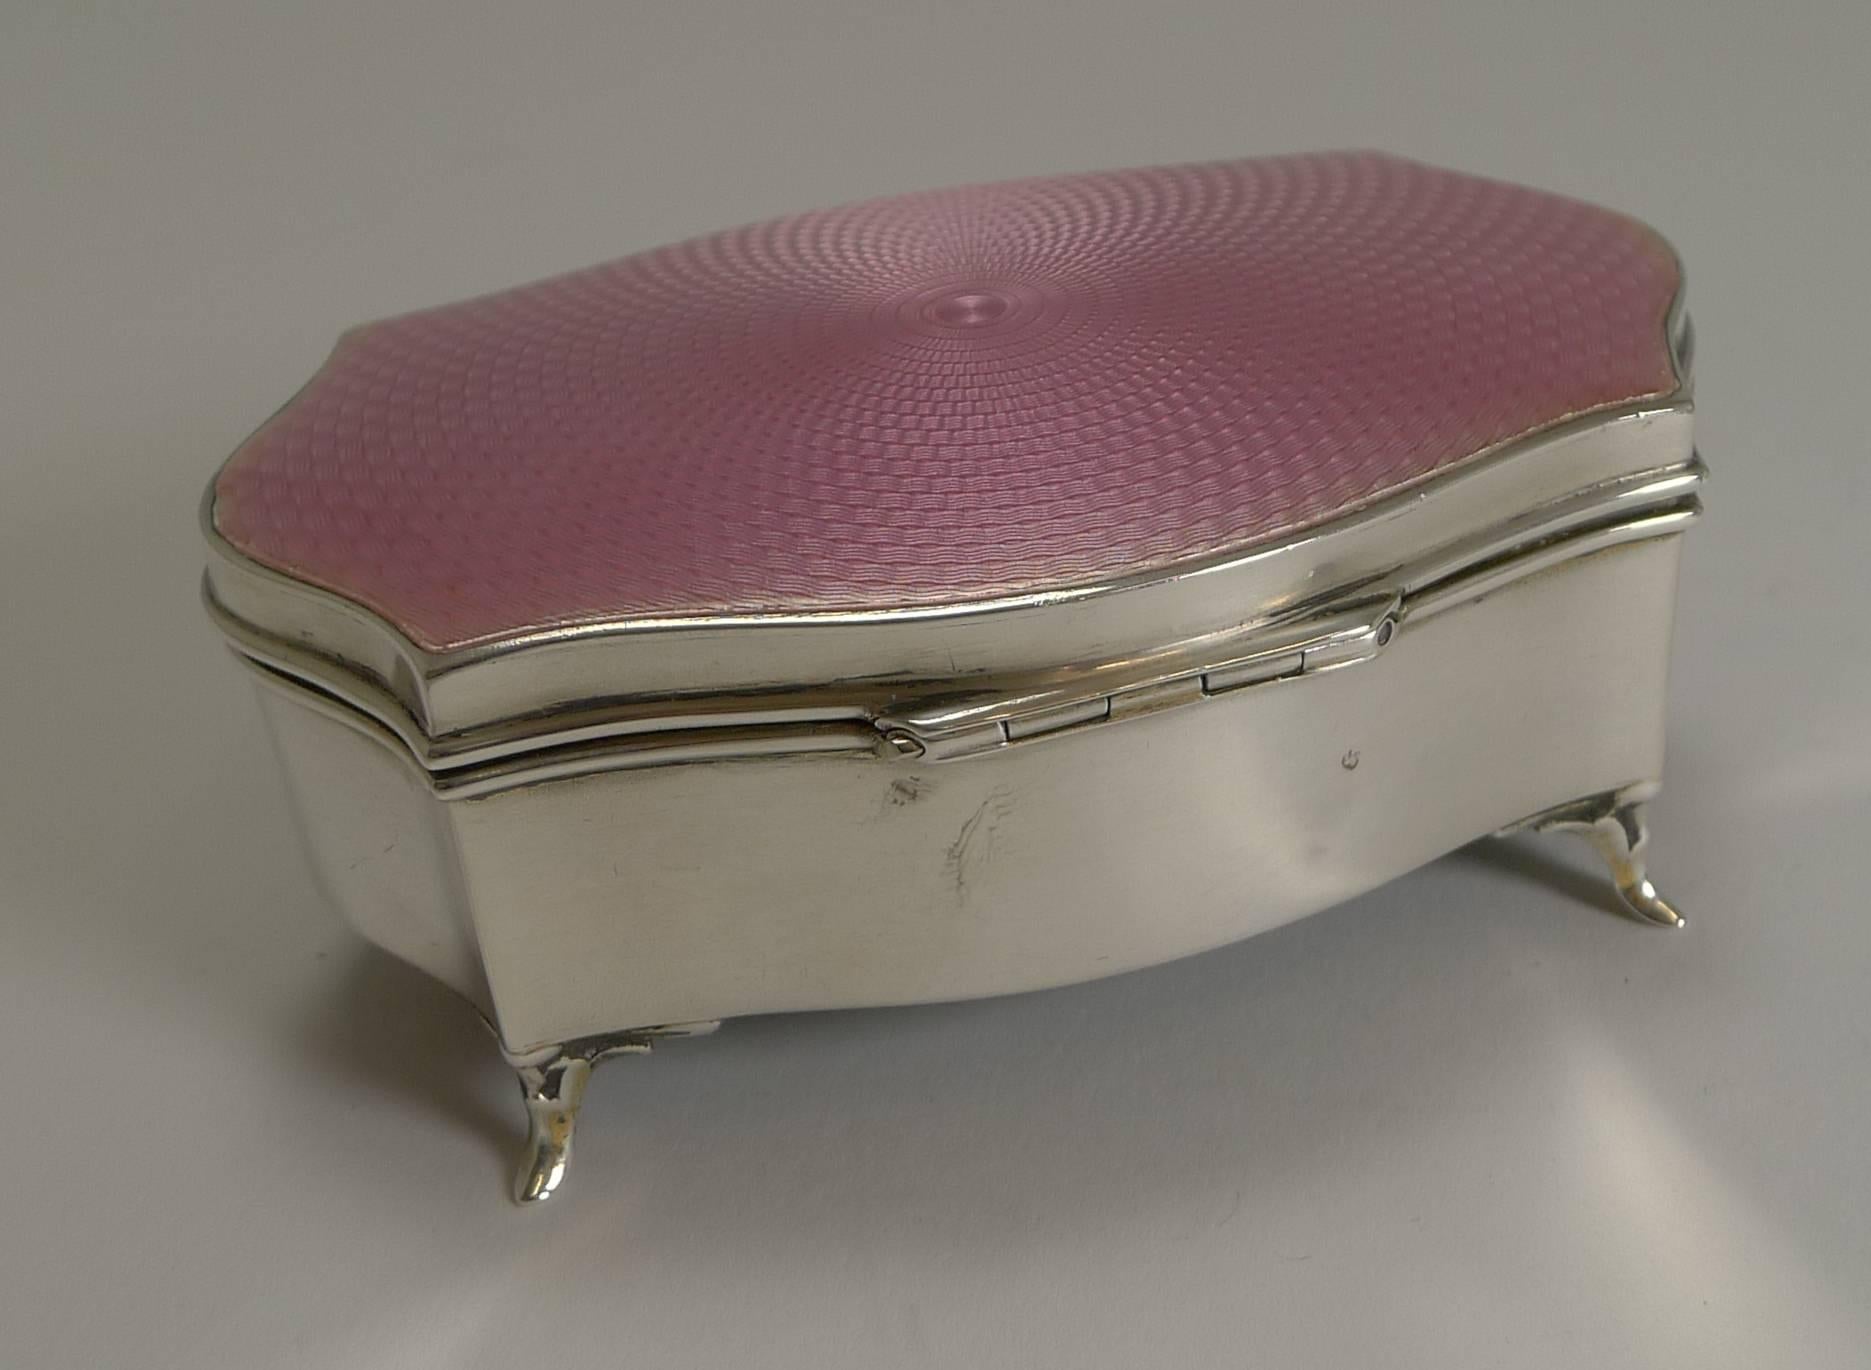 20th Century Silver and Pink Guilloche Enamel Jewelry Box by Asprey, London